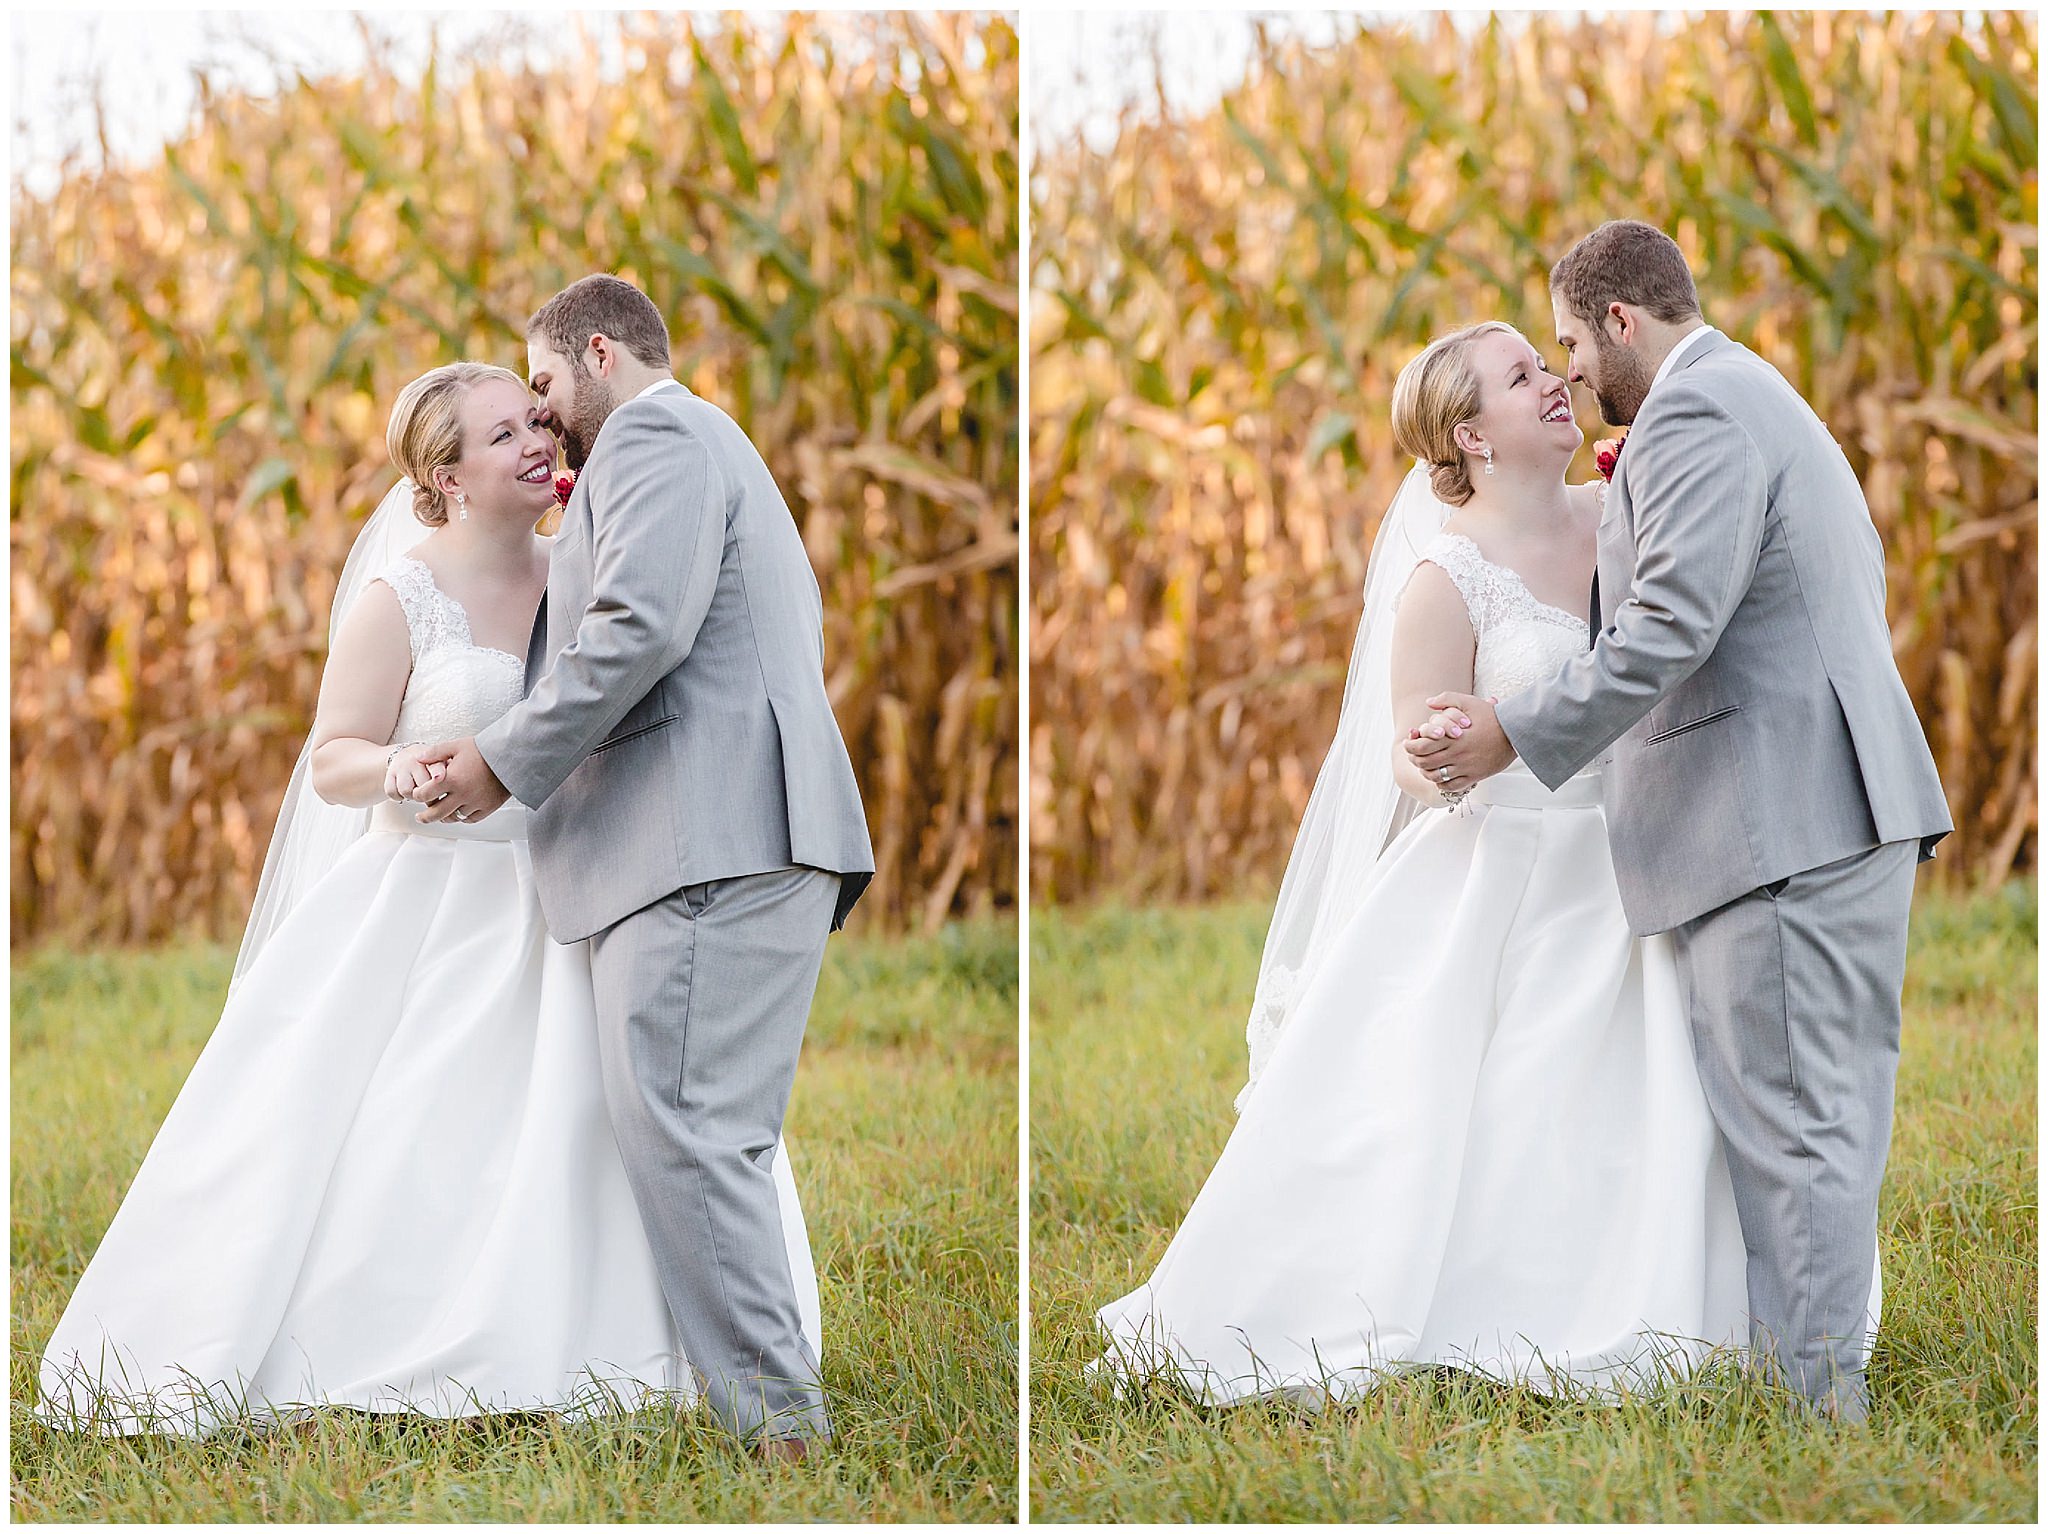 Bride and groom dance near a corn field at the Barn at Soergel Hollow